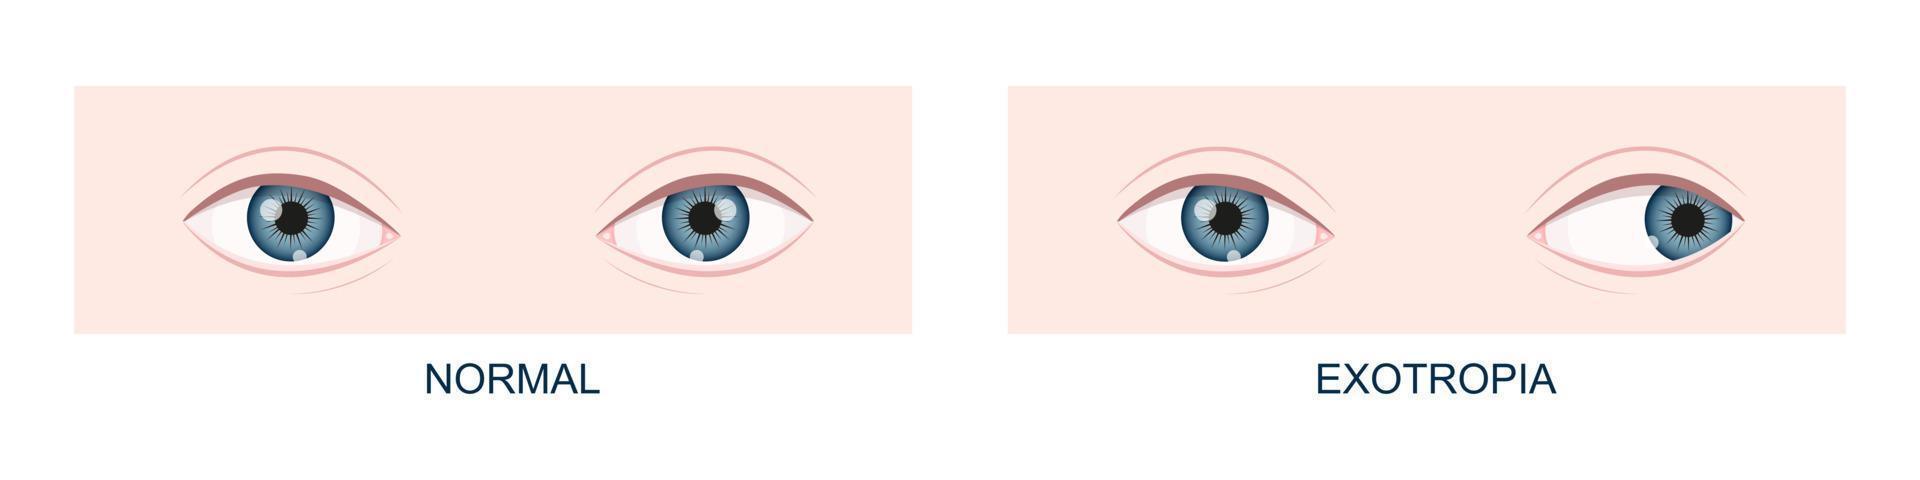 Exotropia. Horizontal strabismus before and after surgery. Eye misalignment, cross-eyed condition. Human eyes healthy and with outward gaze position. Double vision vector